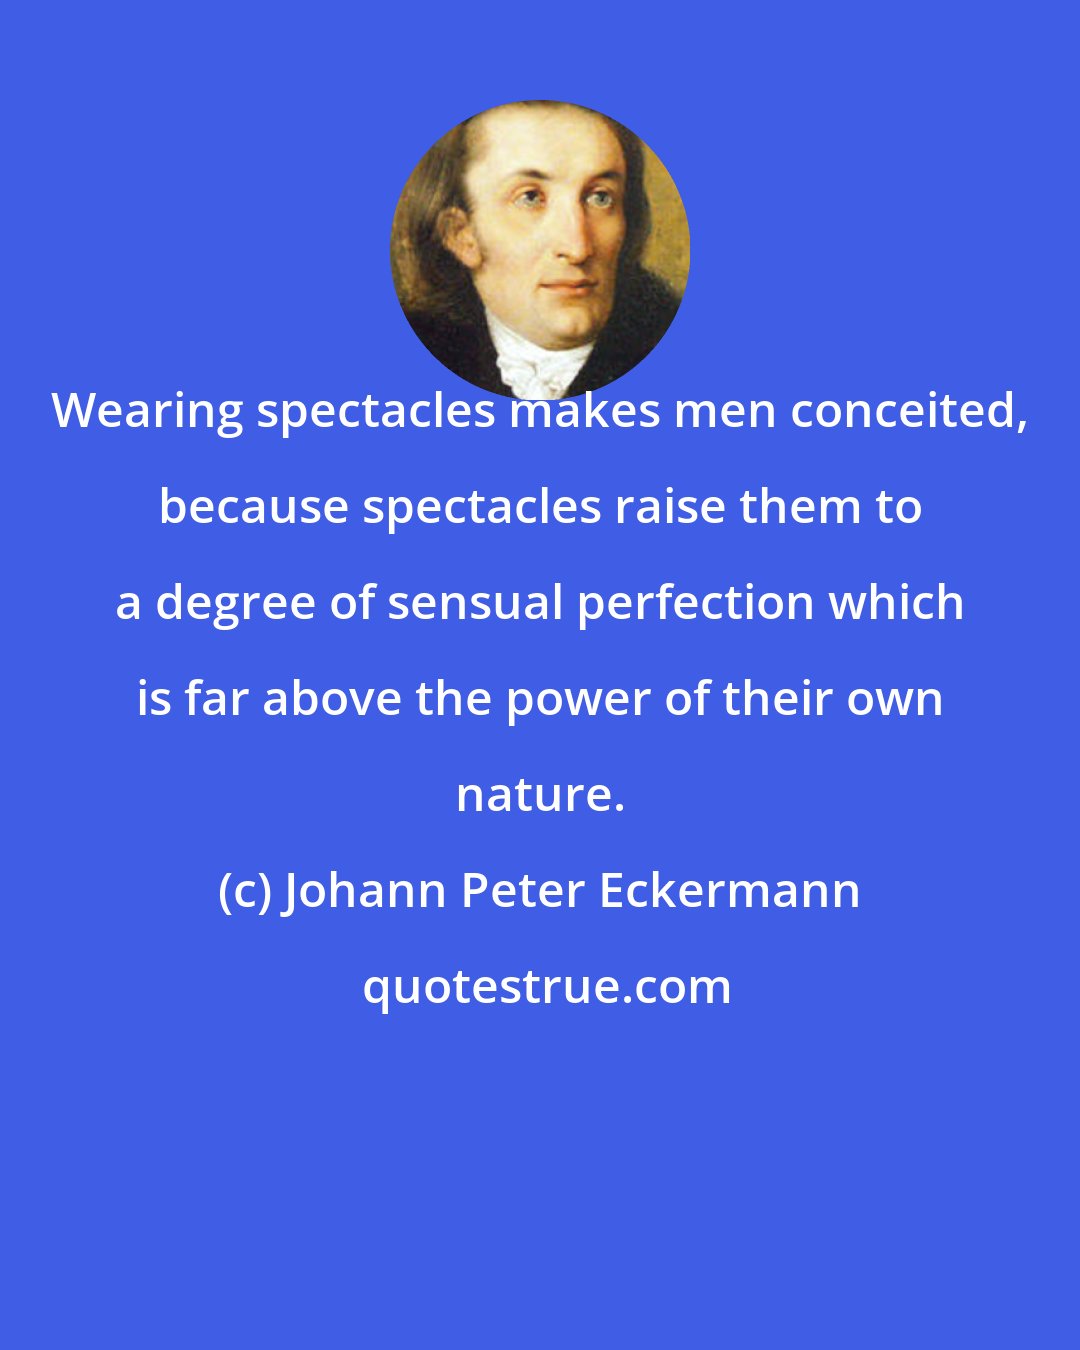 Johann Peter Eckermann: Wearing spectacles makes men conceited, because spectacles raise them to a degree of sensual perfection which is far above the power of their own nature.